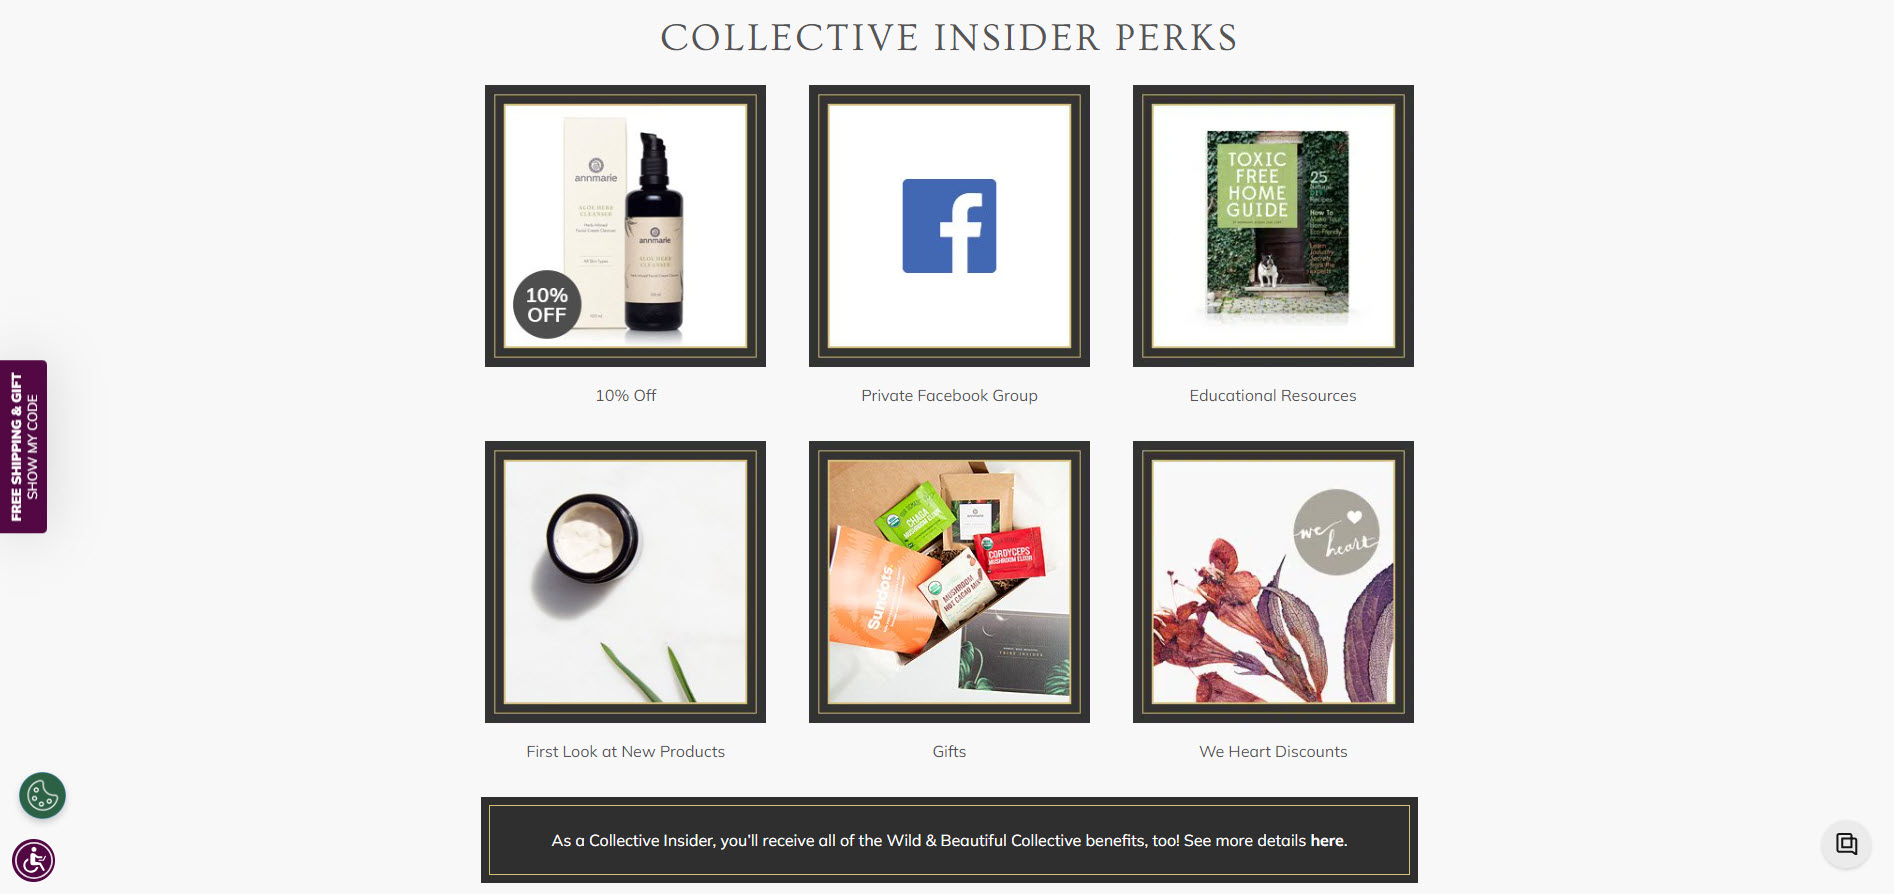 annmarie loyalty program collective insider perks